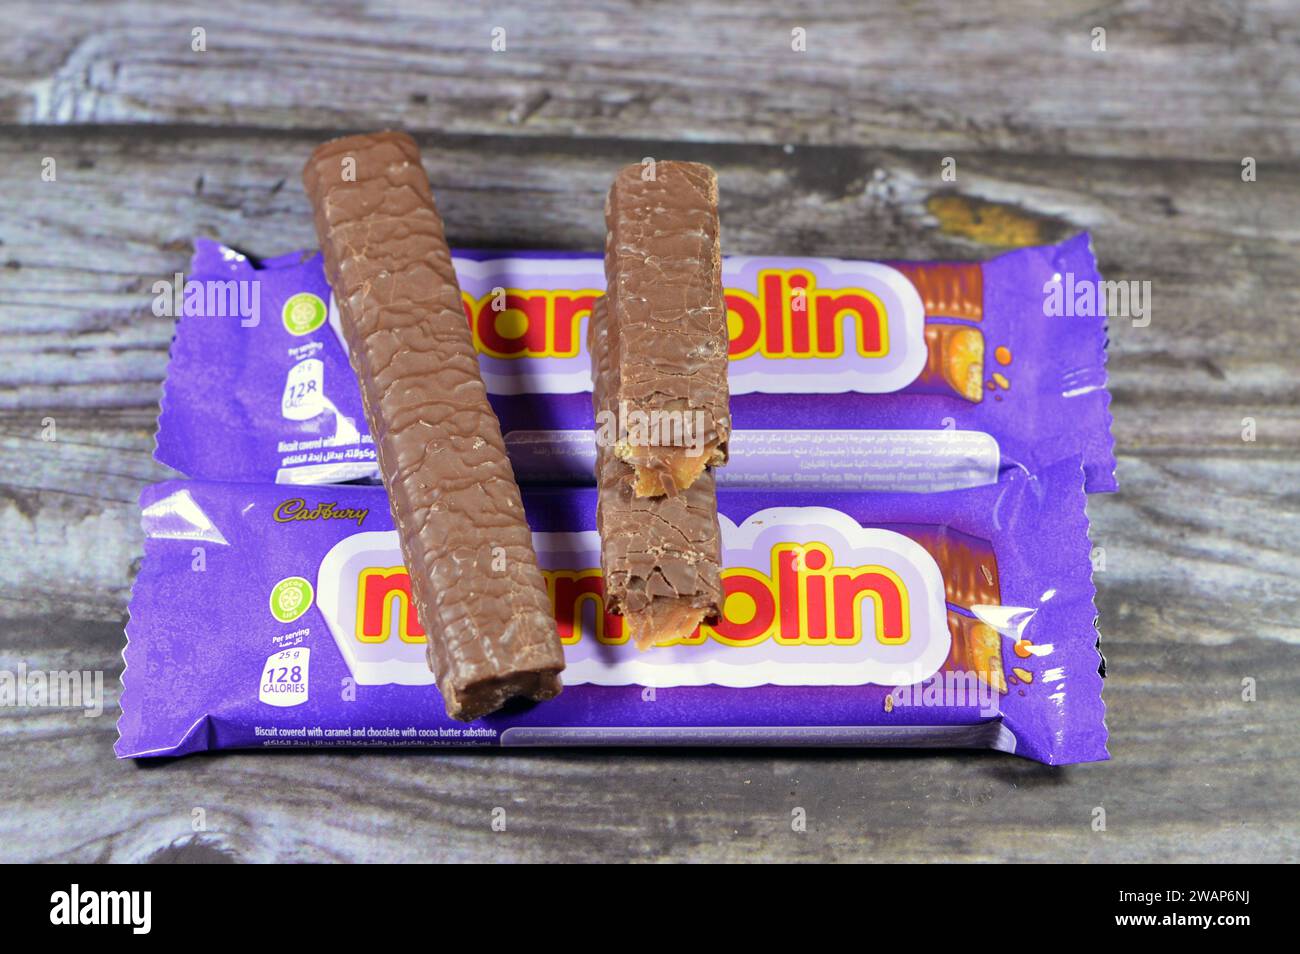 Cairo, Egypt, January 1 2024: Mandolin Biscuit Covered with Caramel and Chocolate, Cadbury Mandolin bars with Ingredients of Stock Photo